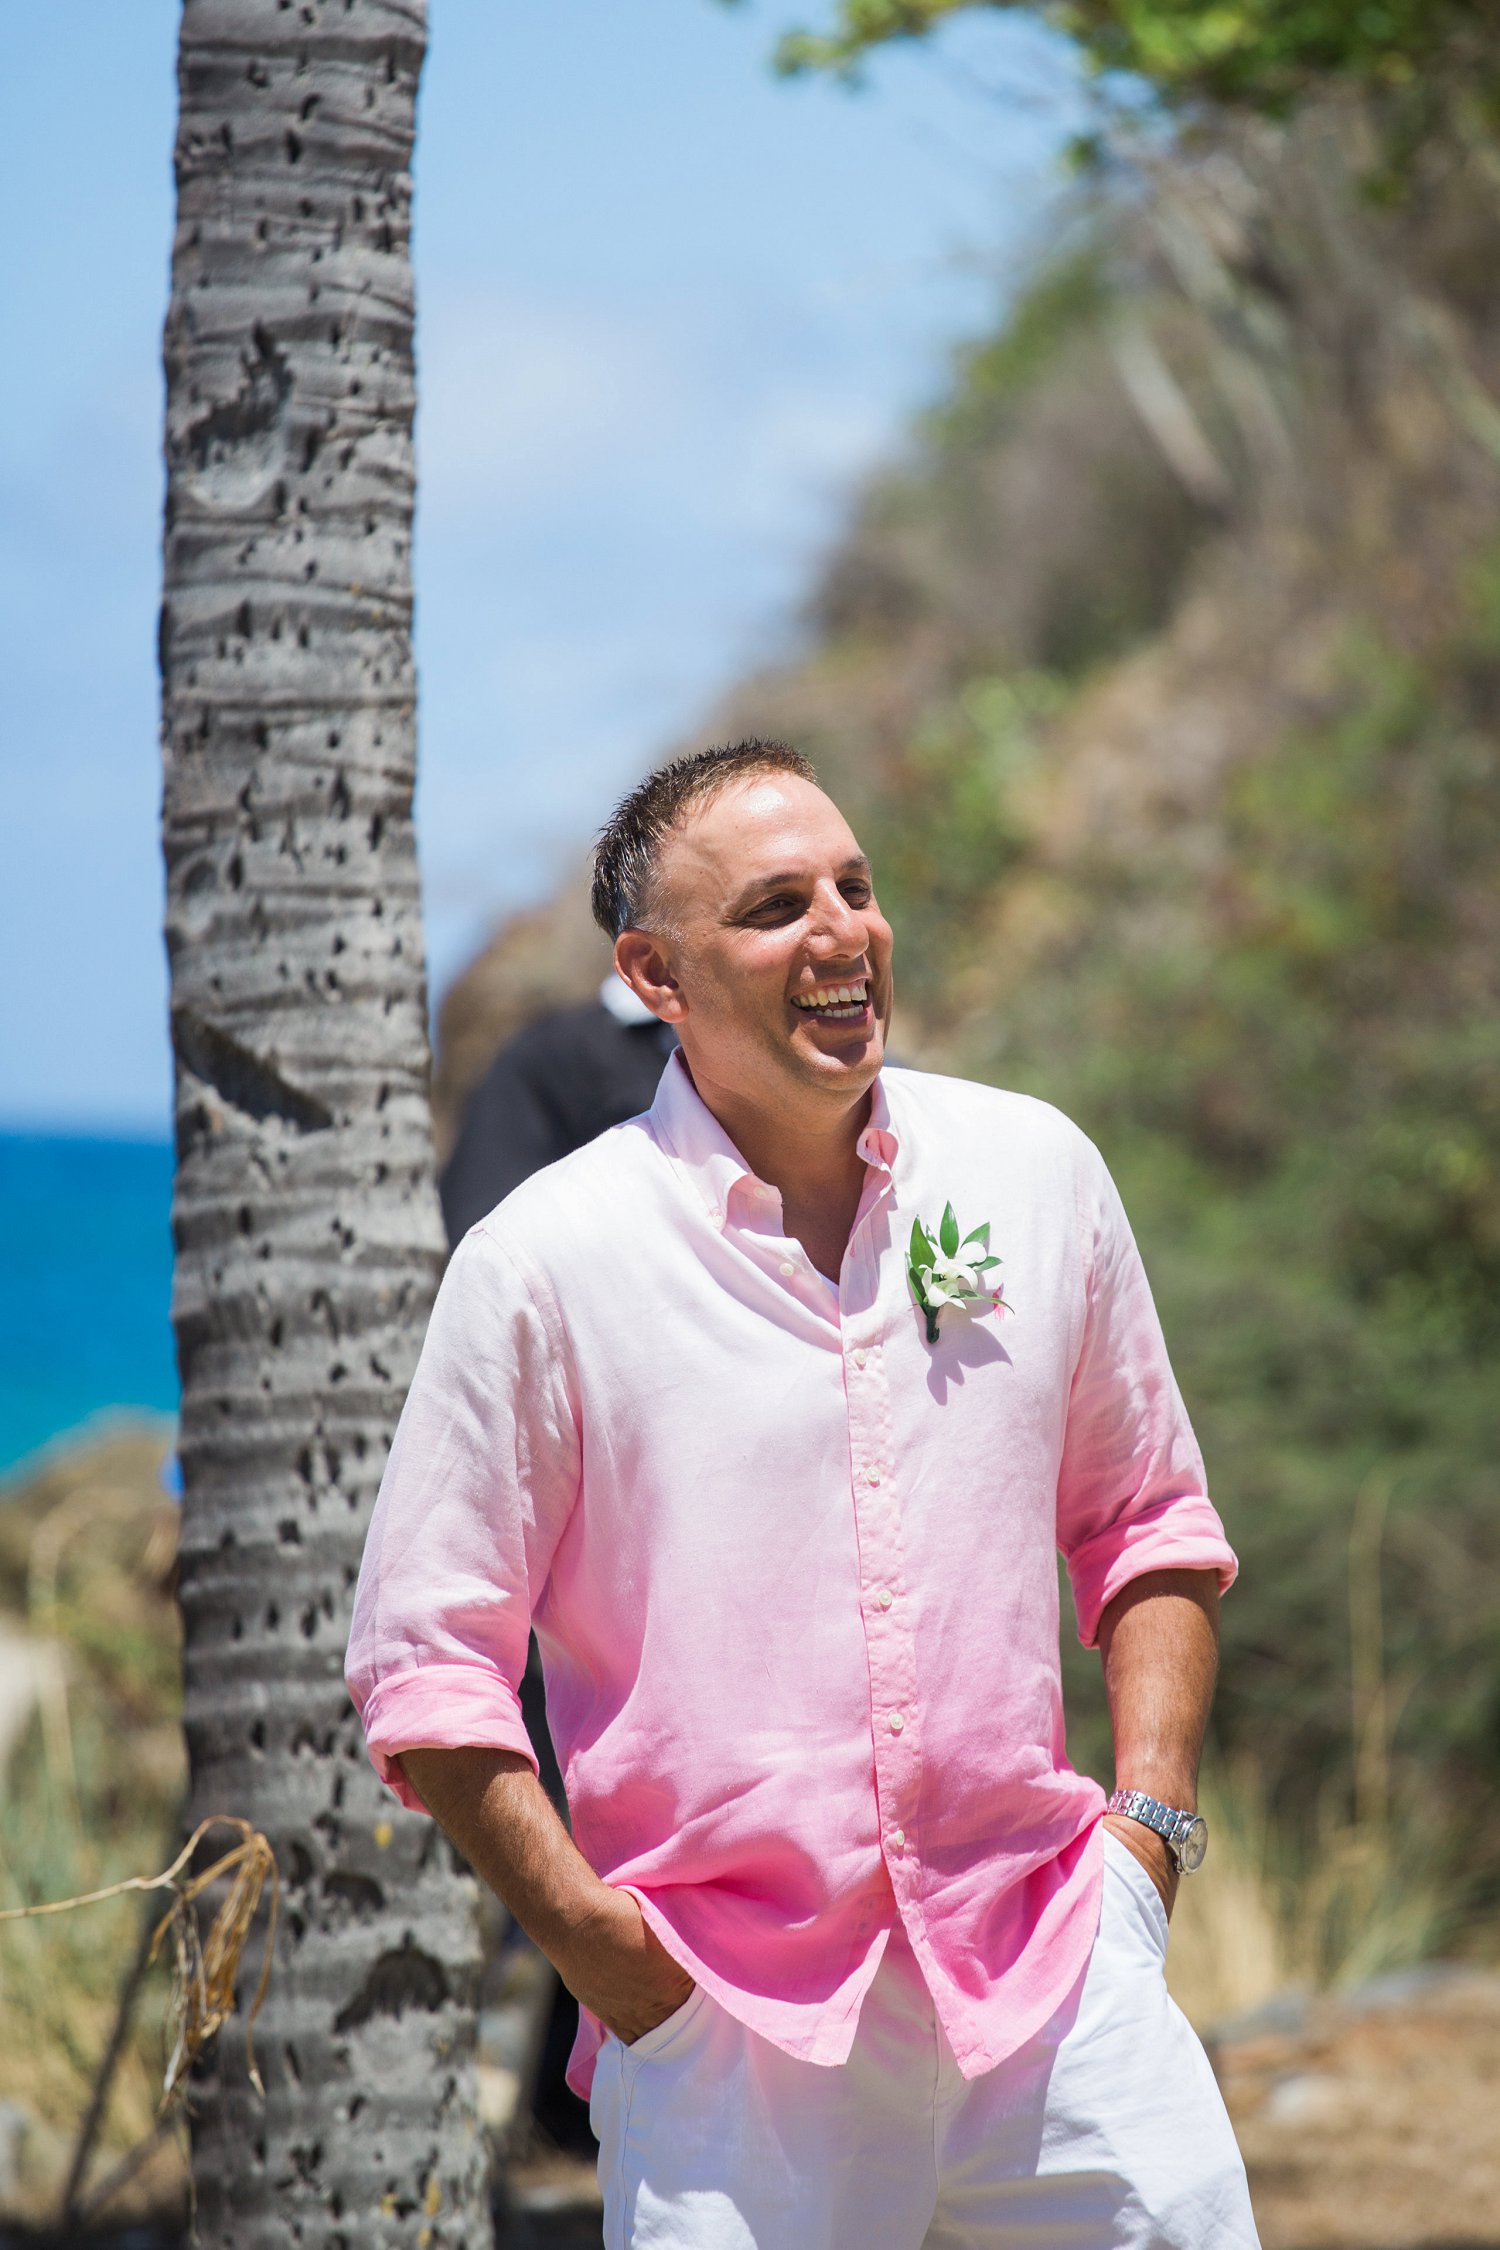 Smiling groom in pink shirt with white orchid boutonniere sees the bride for the first time at vow renewal ceremony.